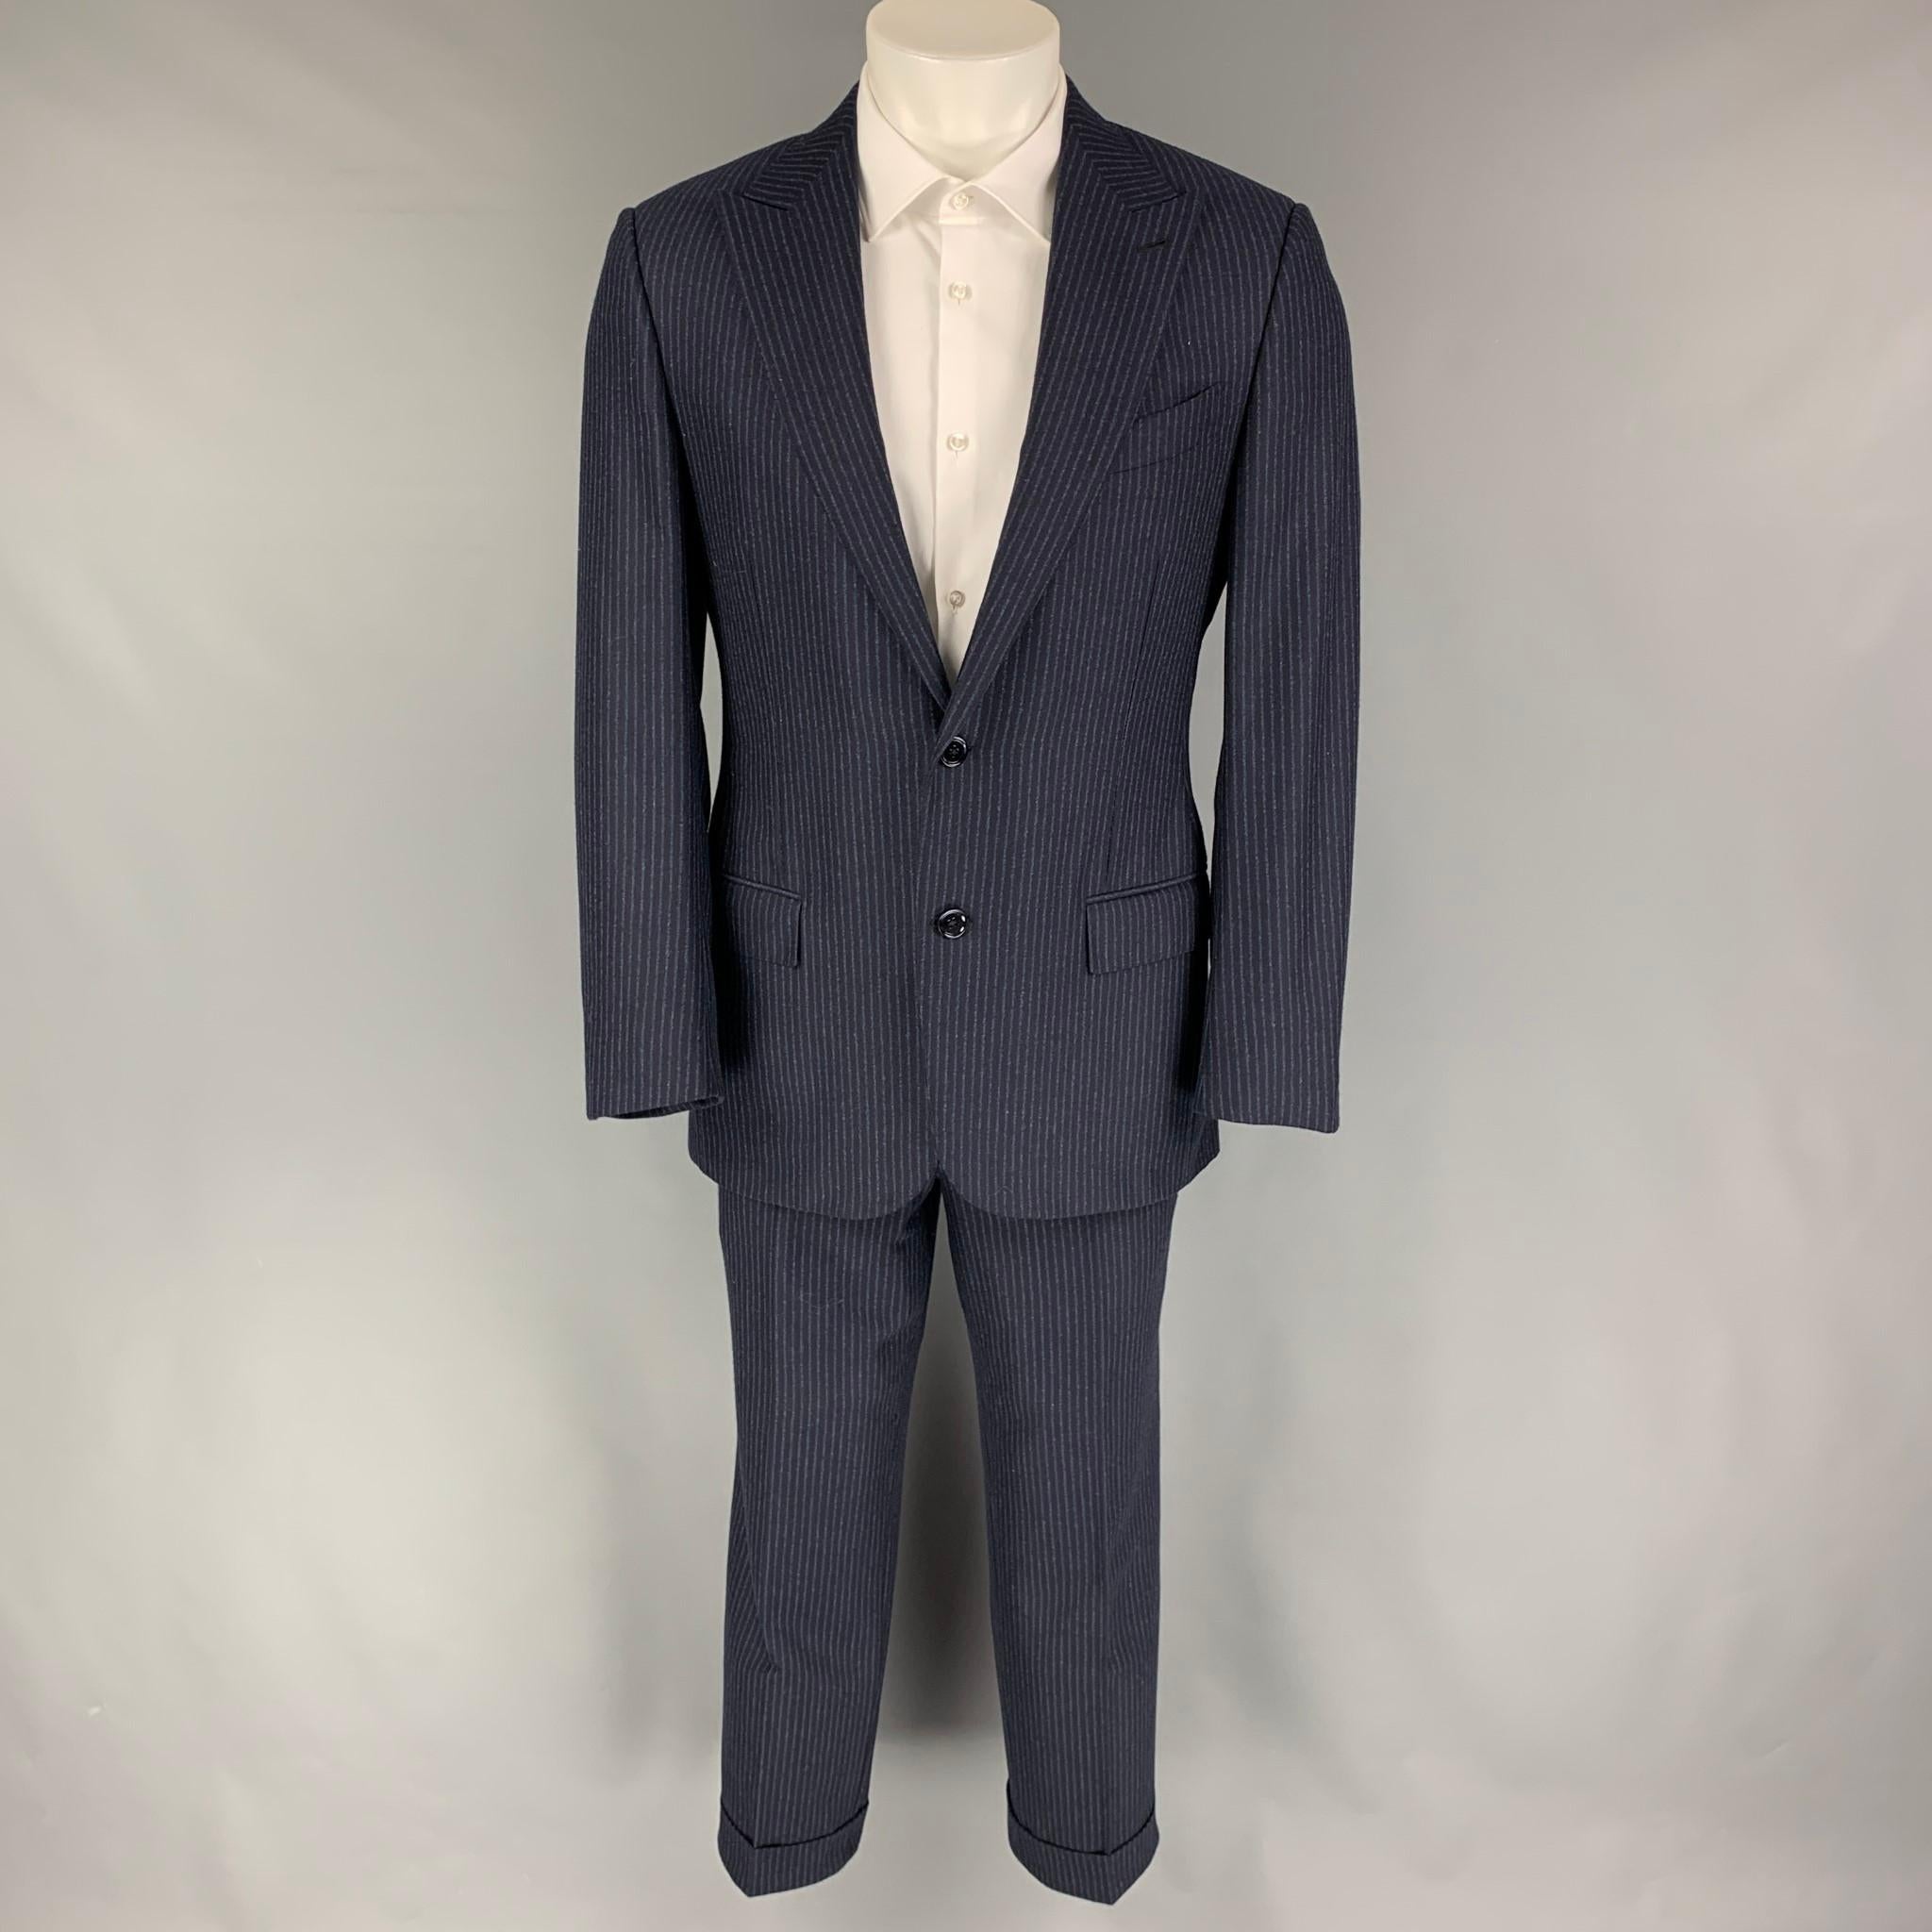 ERMENEGILDO ZEGNA suit comes in a navy & blue chalk stripe wool / cashmere with full liner and includes a single breasted, two button sport coat with a peak lapel and matching flat front trousers. Made in Italy.

Excellent Pre-Owned